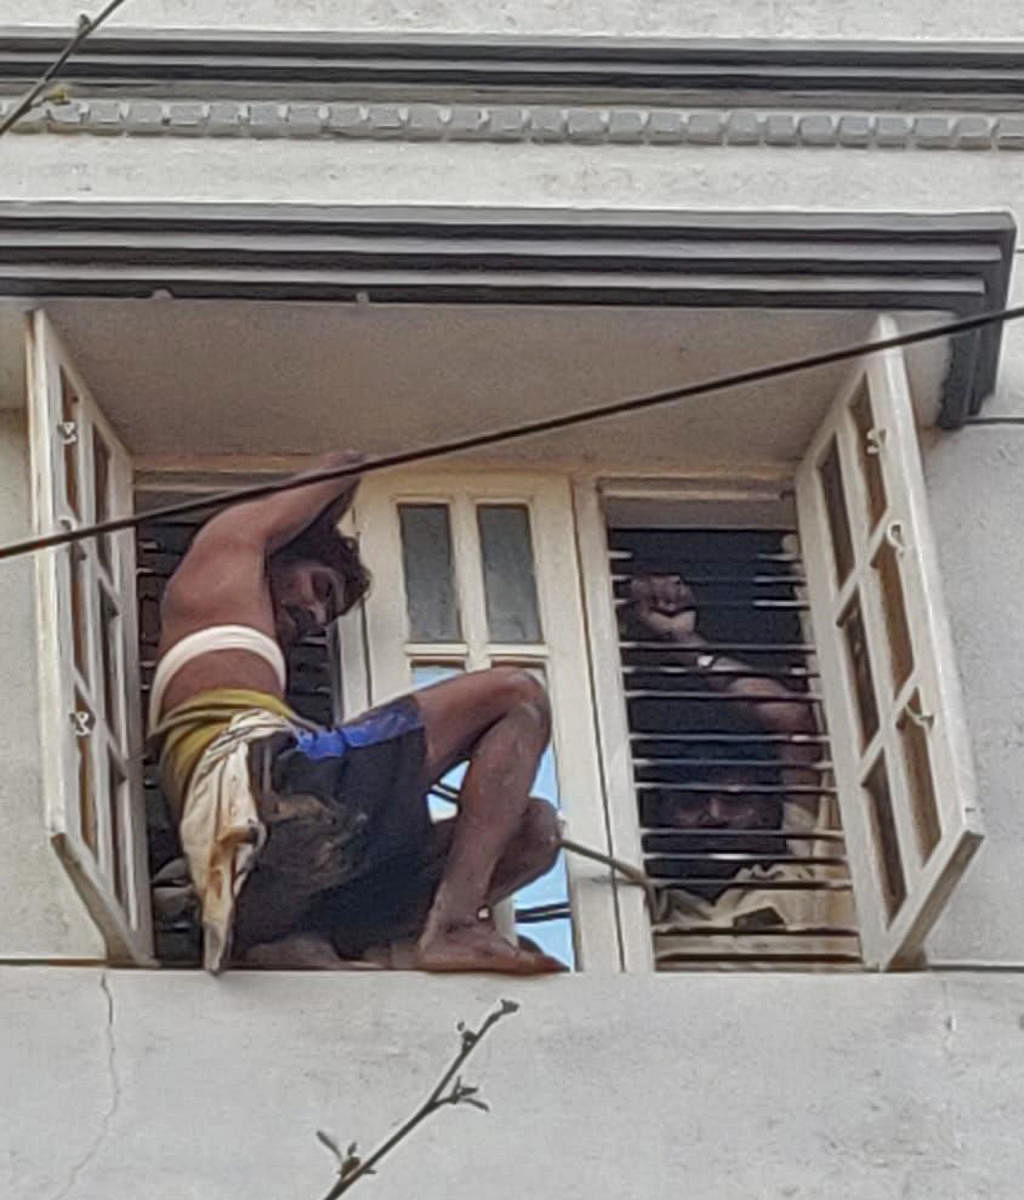 High drama prevailed in the early hours of Saturday as Suhant B (28) clung on to the window crying for help, before firemen rescued him. 